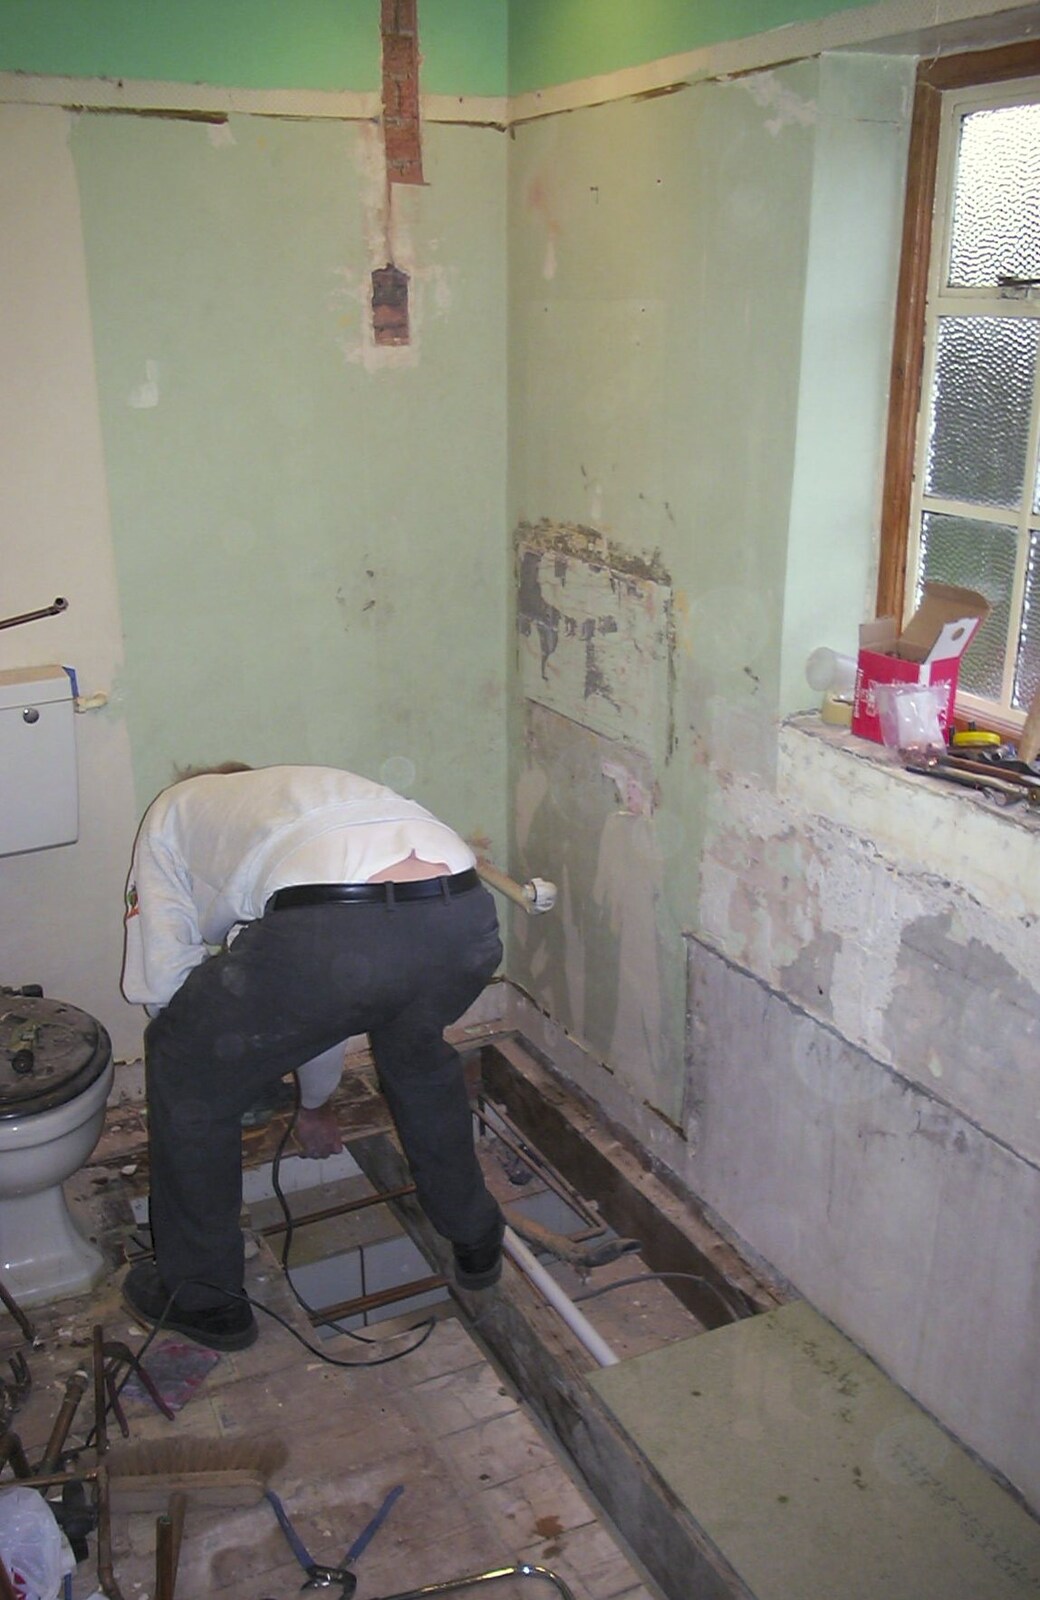 The old chap works over a hole in the floor from Bathroom Rebuilding, Brome, Suffolk - 1st February 2002